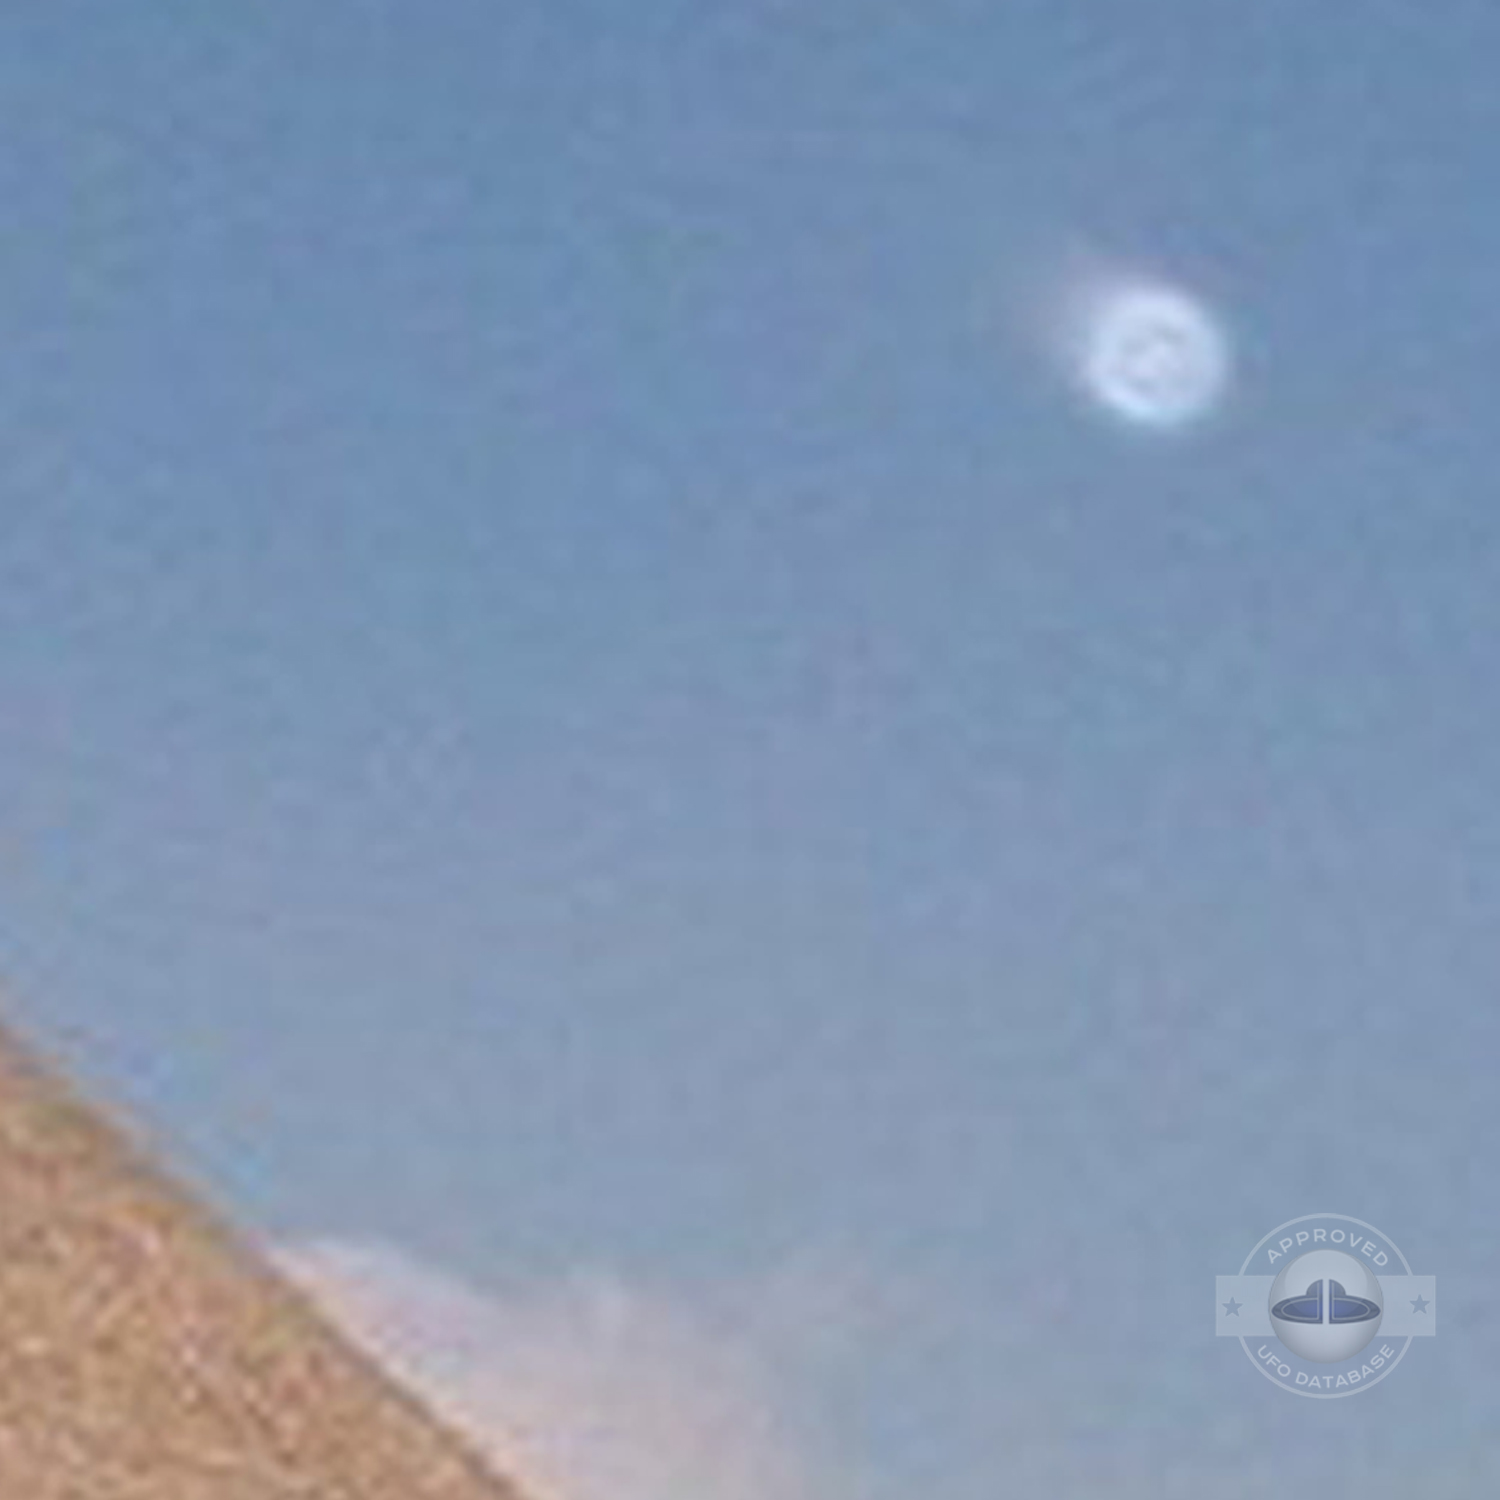 UFO picture near the famous Great Sphinx of Giza by a tourist | Egypt UFO Picture #143-6